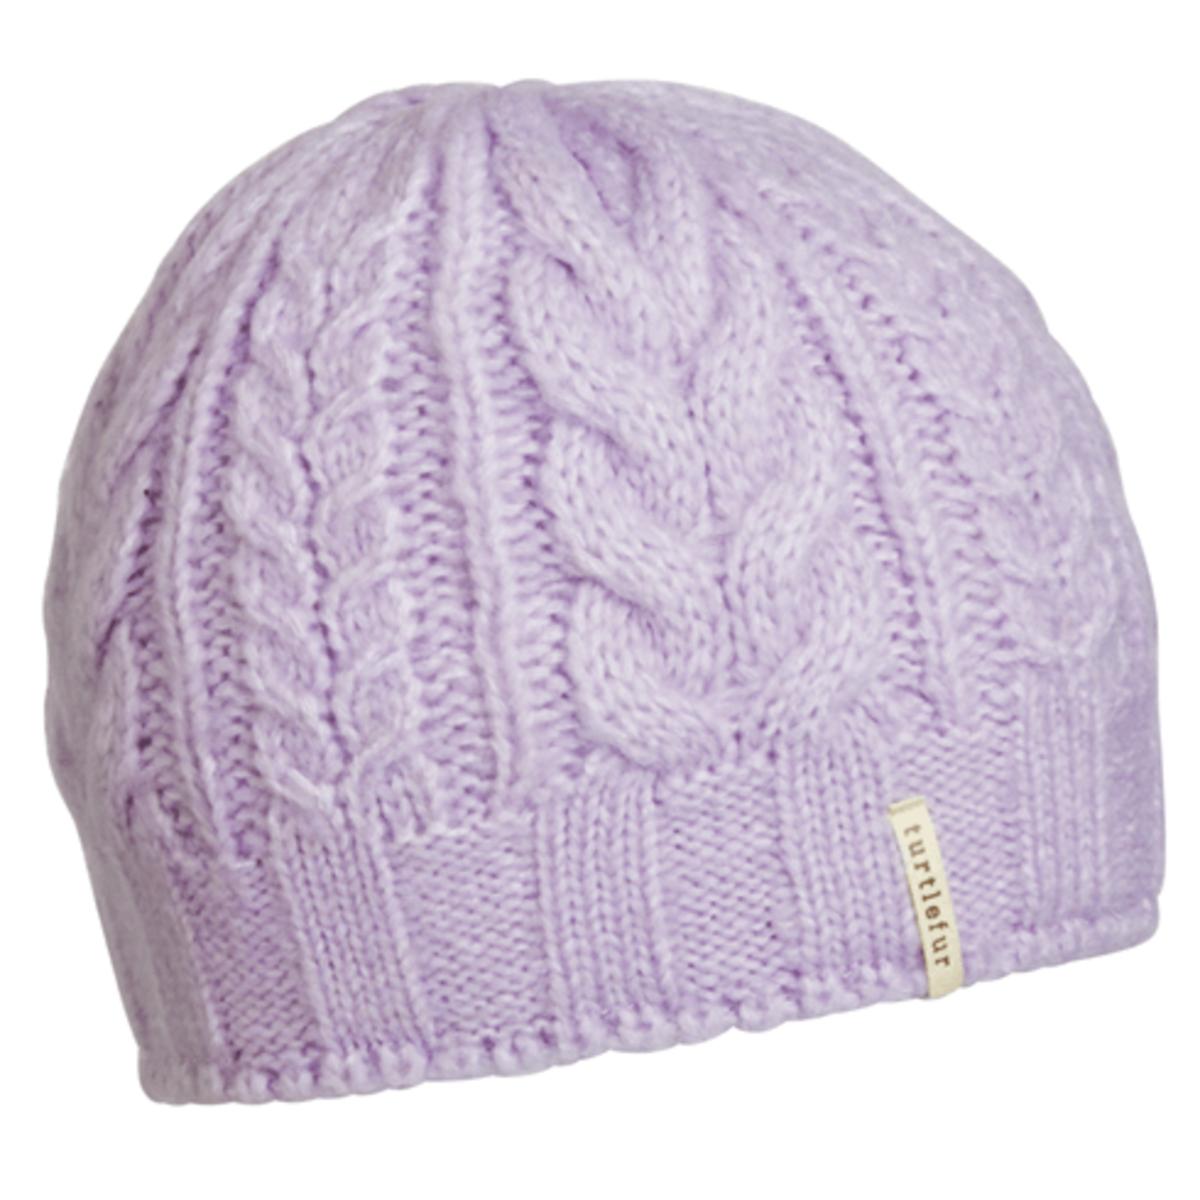 Turtle Fur Sky Beanie Recycled Knit Winter Hat Lavender